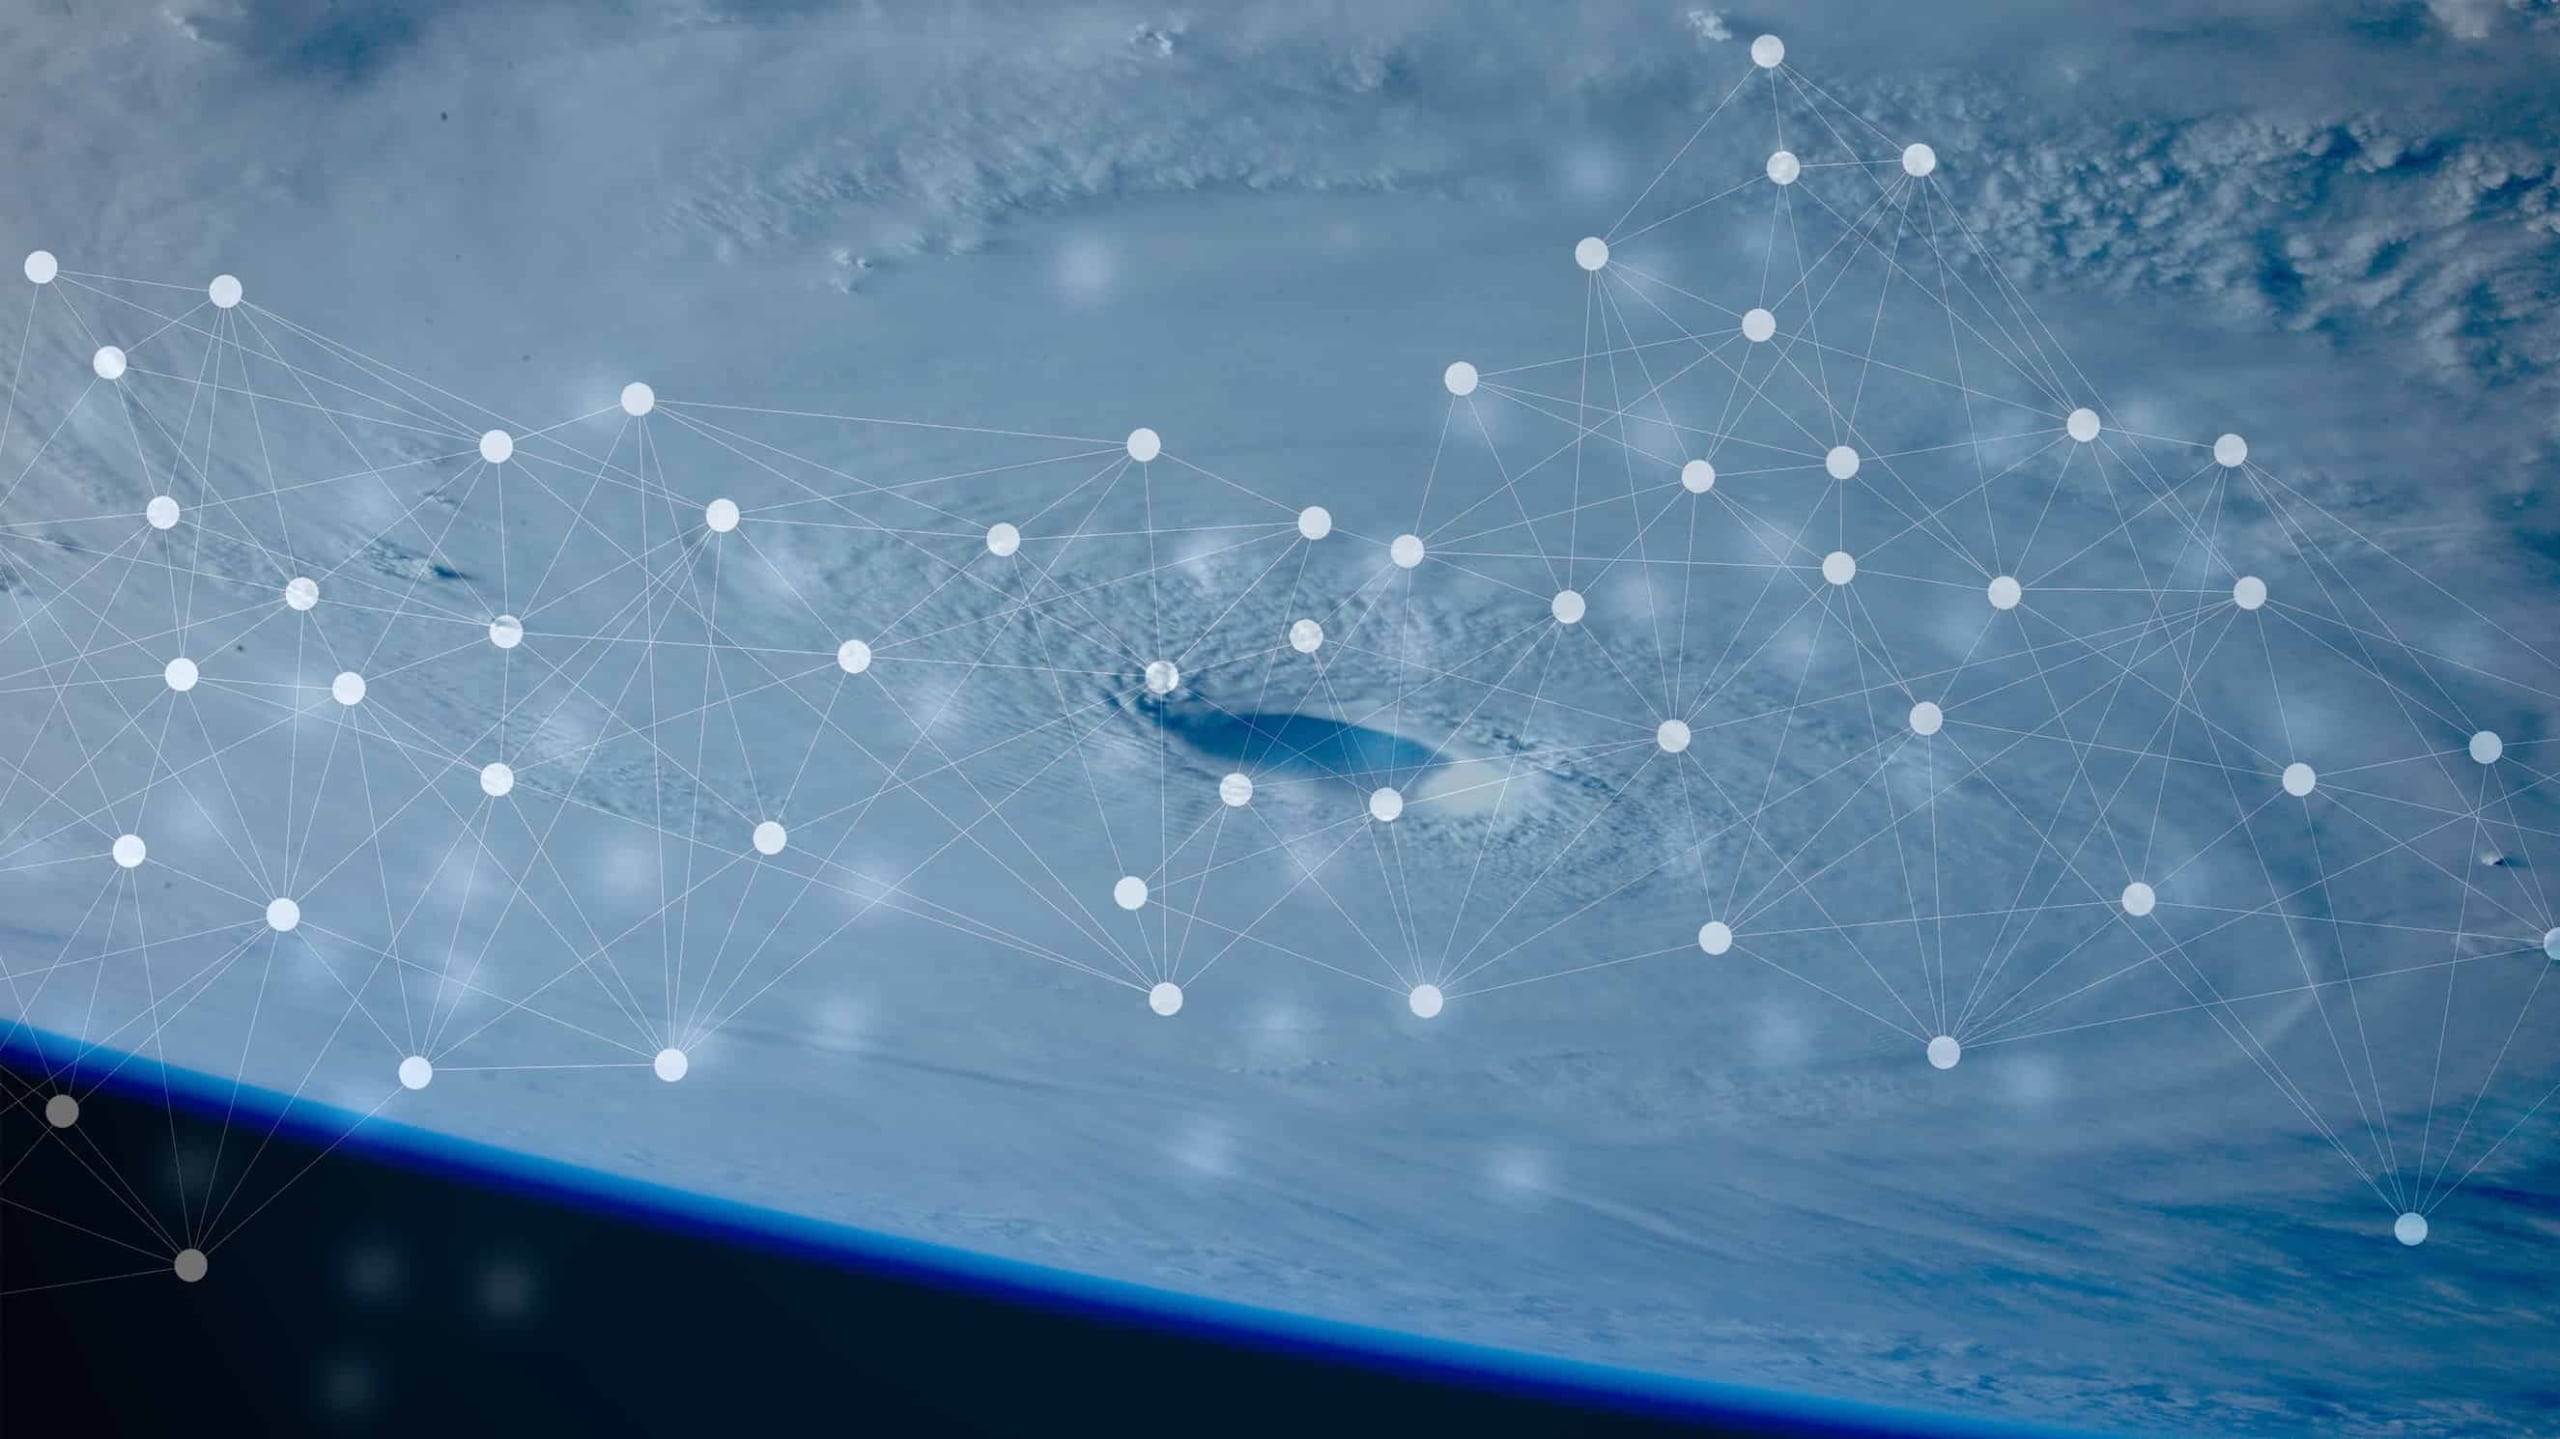 An abstract image featuring a high-altitude view of earth with a detailed network of white lines and dots overlaying, suggesting data connectivity or a digital network concept.